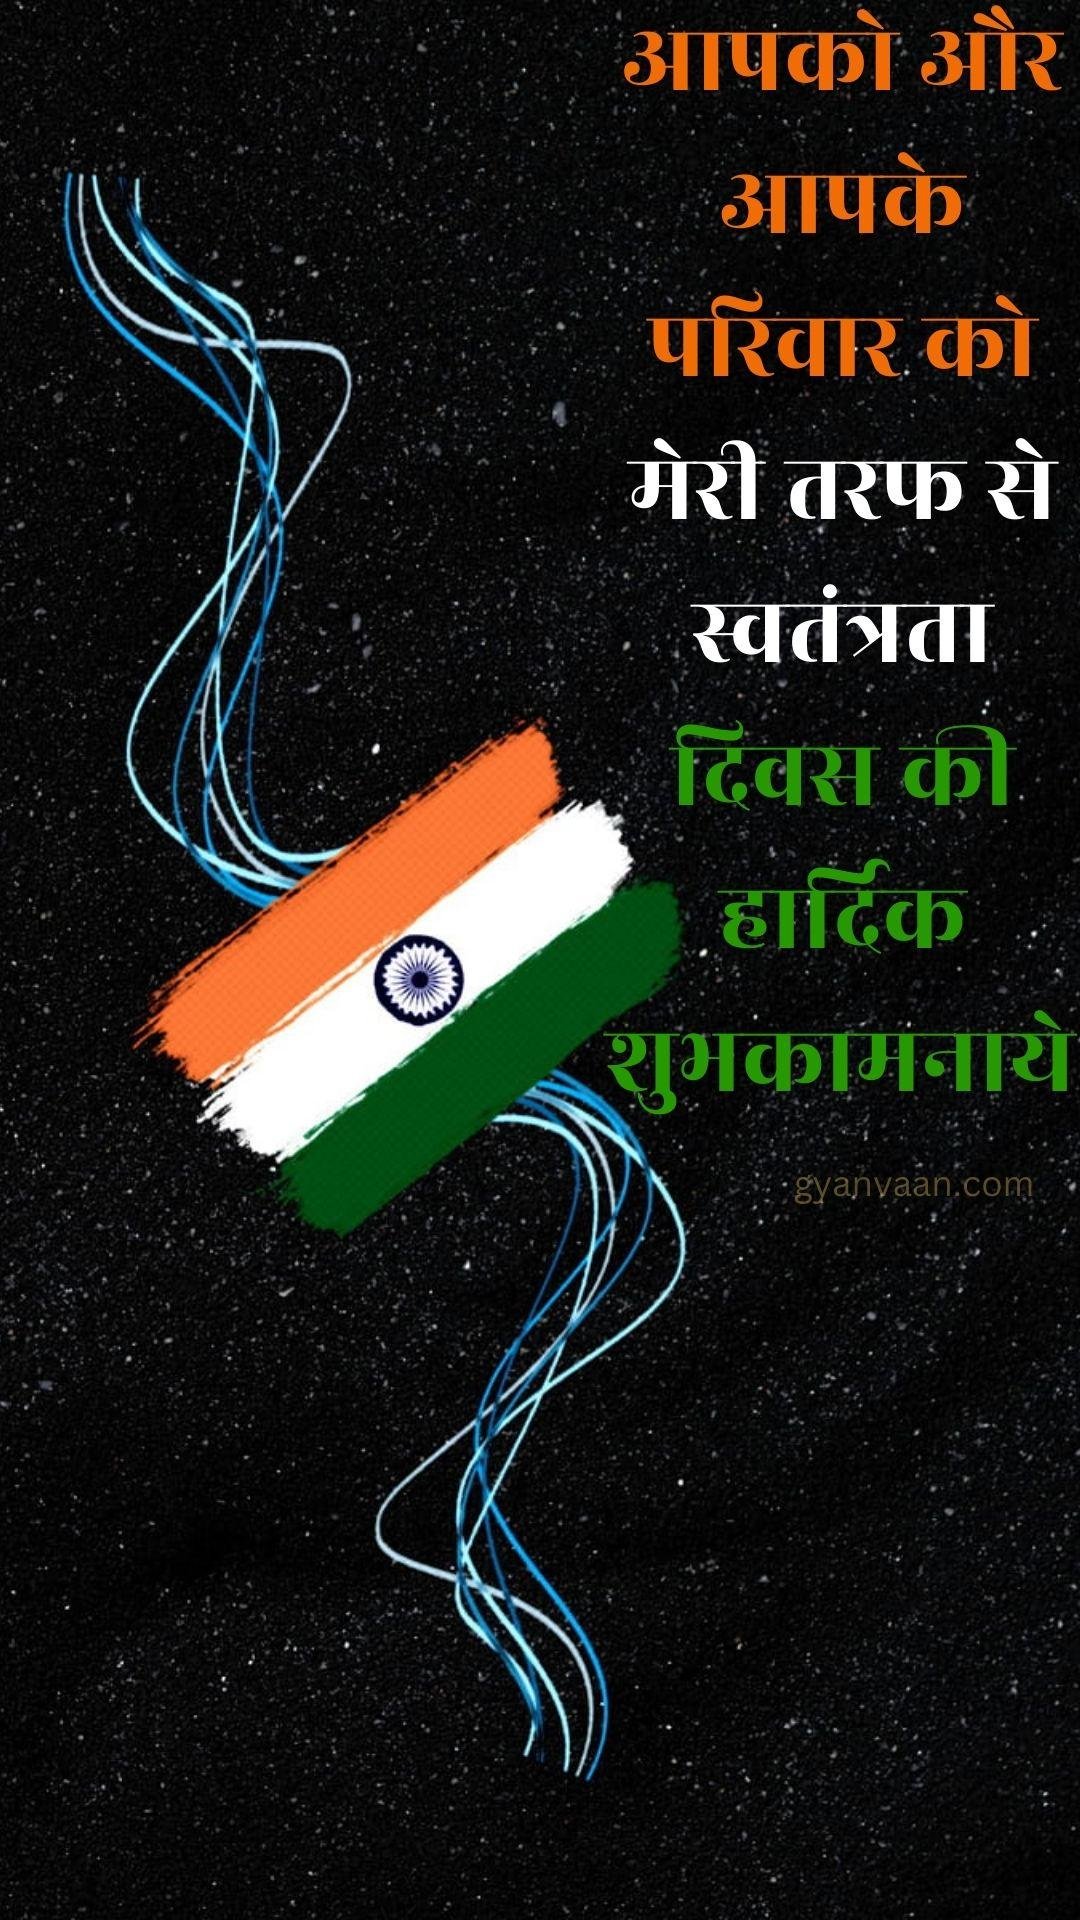 Independence Day Quotes In Hindi With Shayari Slogan Wishes For Whatsapp Status Mobile 11 - Independence Day Quotes In Hindi